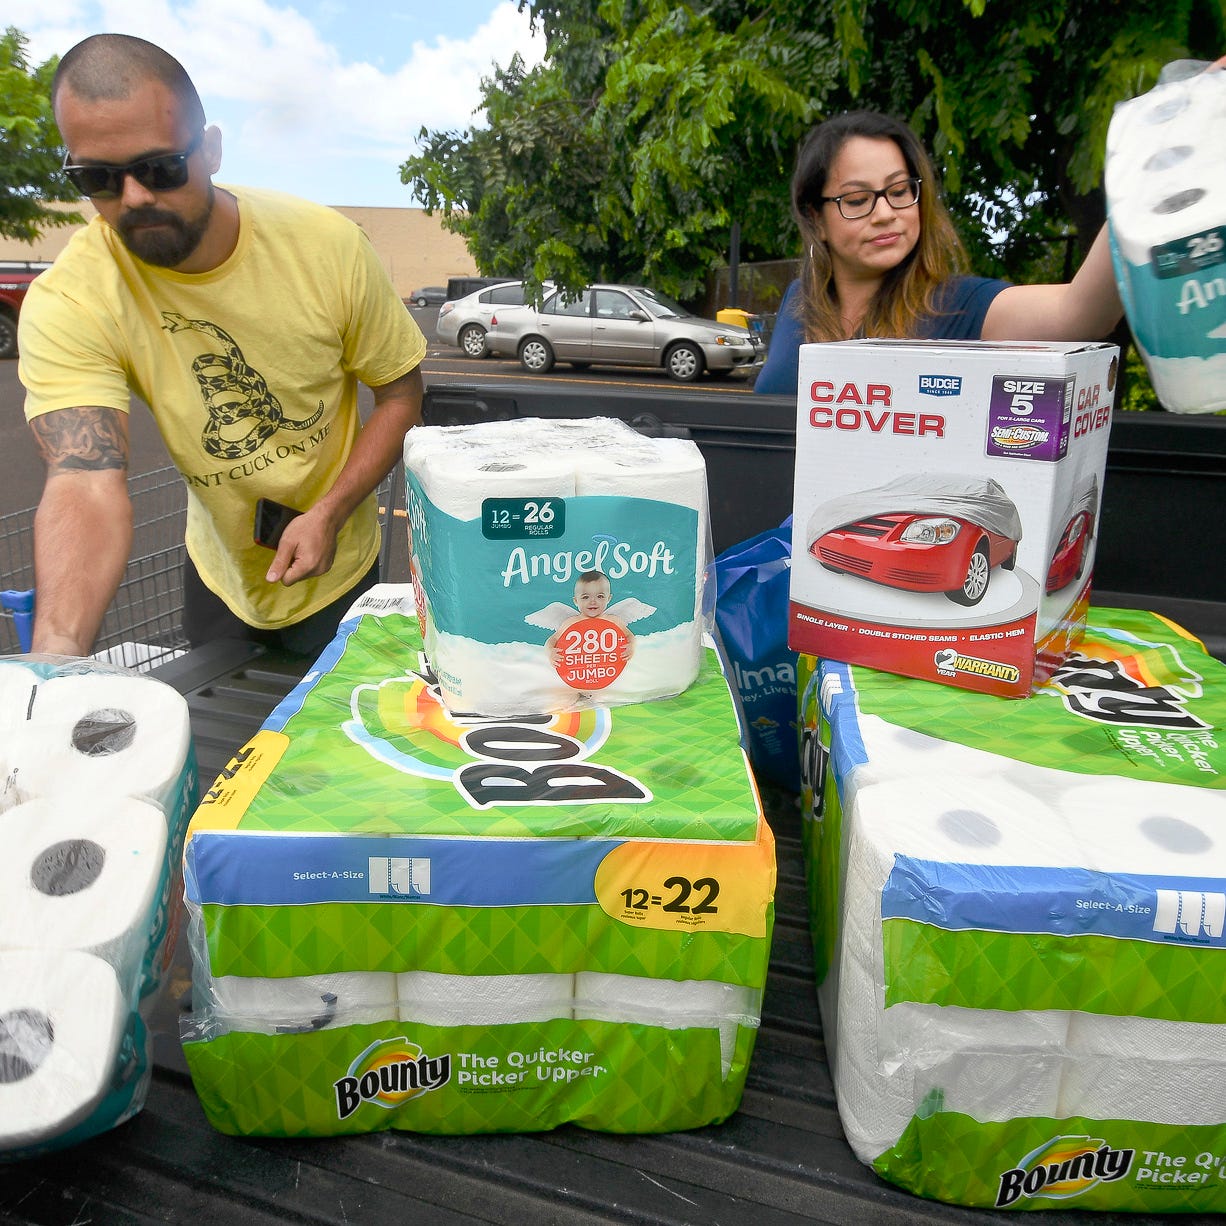 Bryce and Dom Boeder of Waimea, Kauai, load their truck with storm supplies in the parking lot of a Walmart store in Lihue, on the island of Kauai, Hawaii.